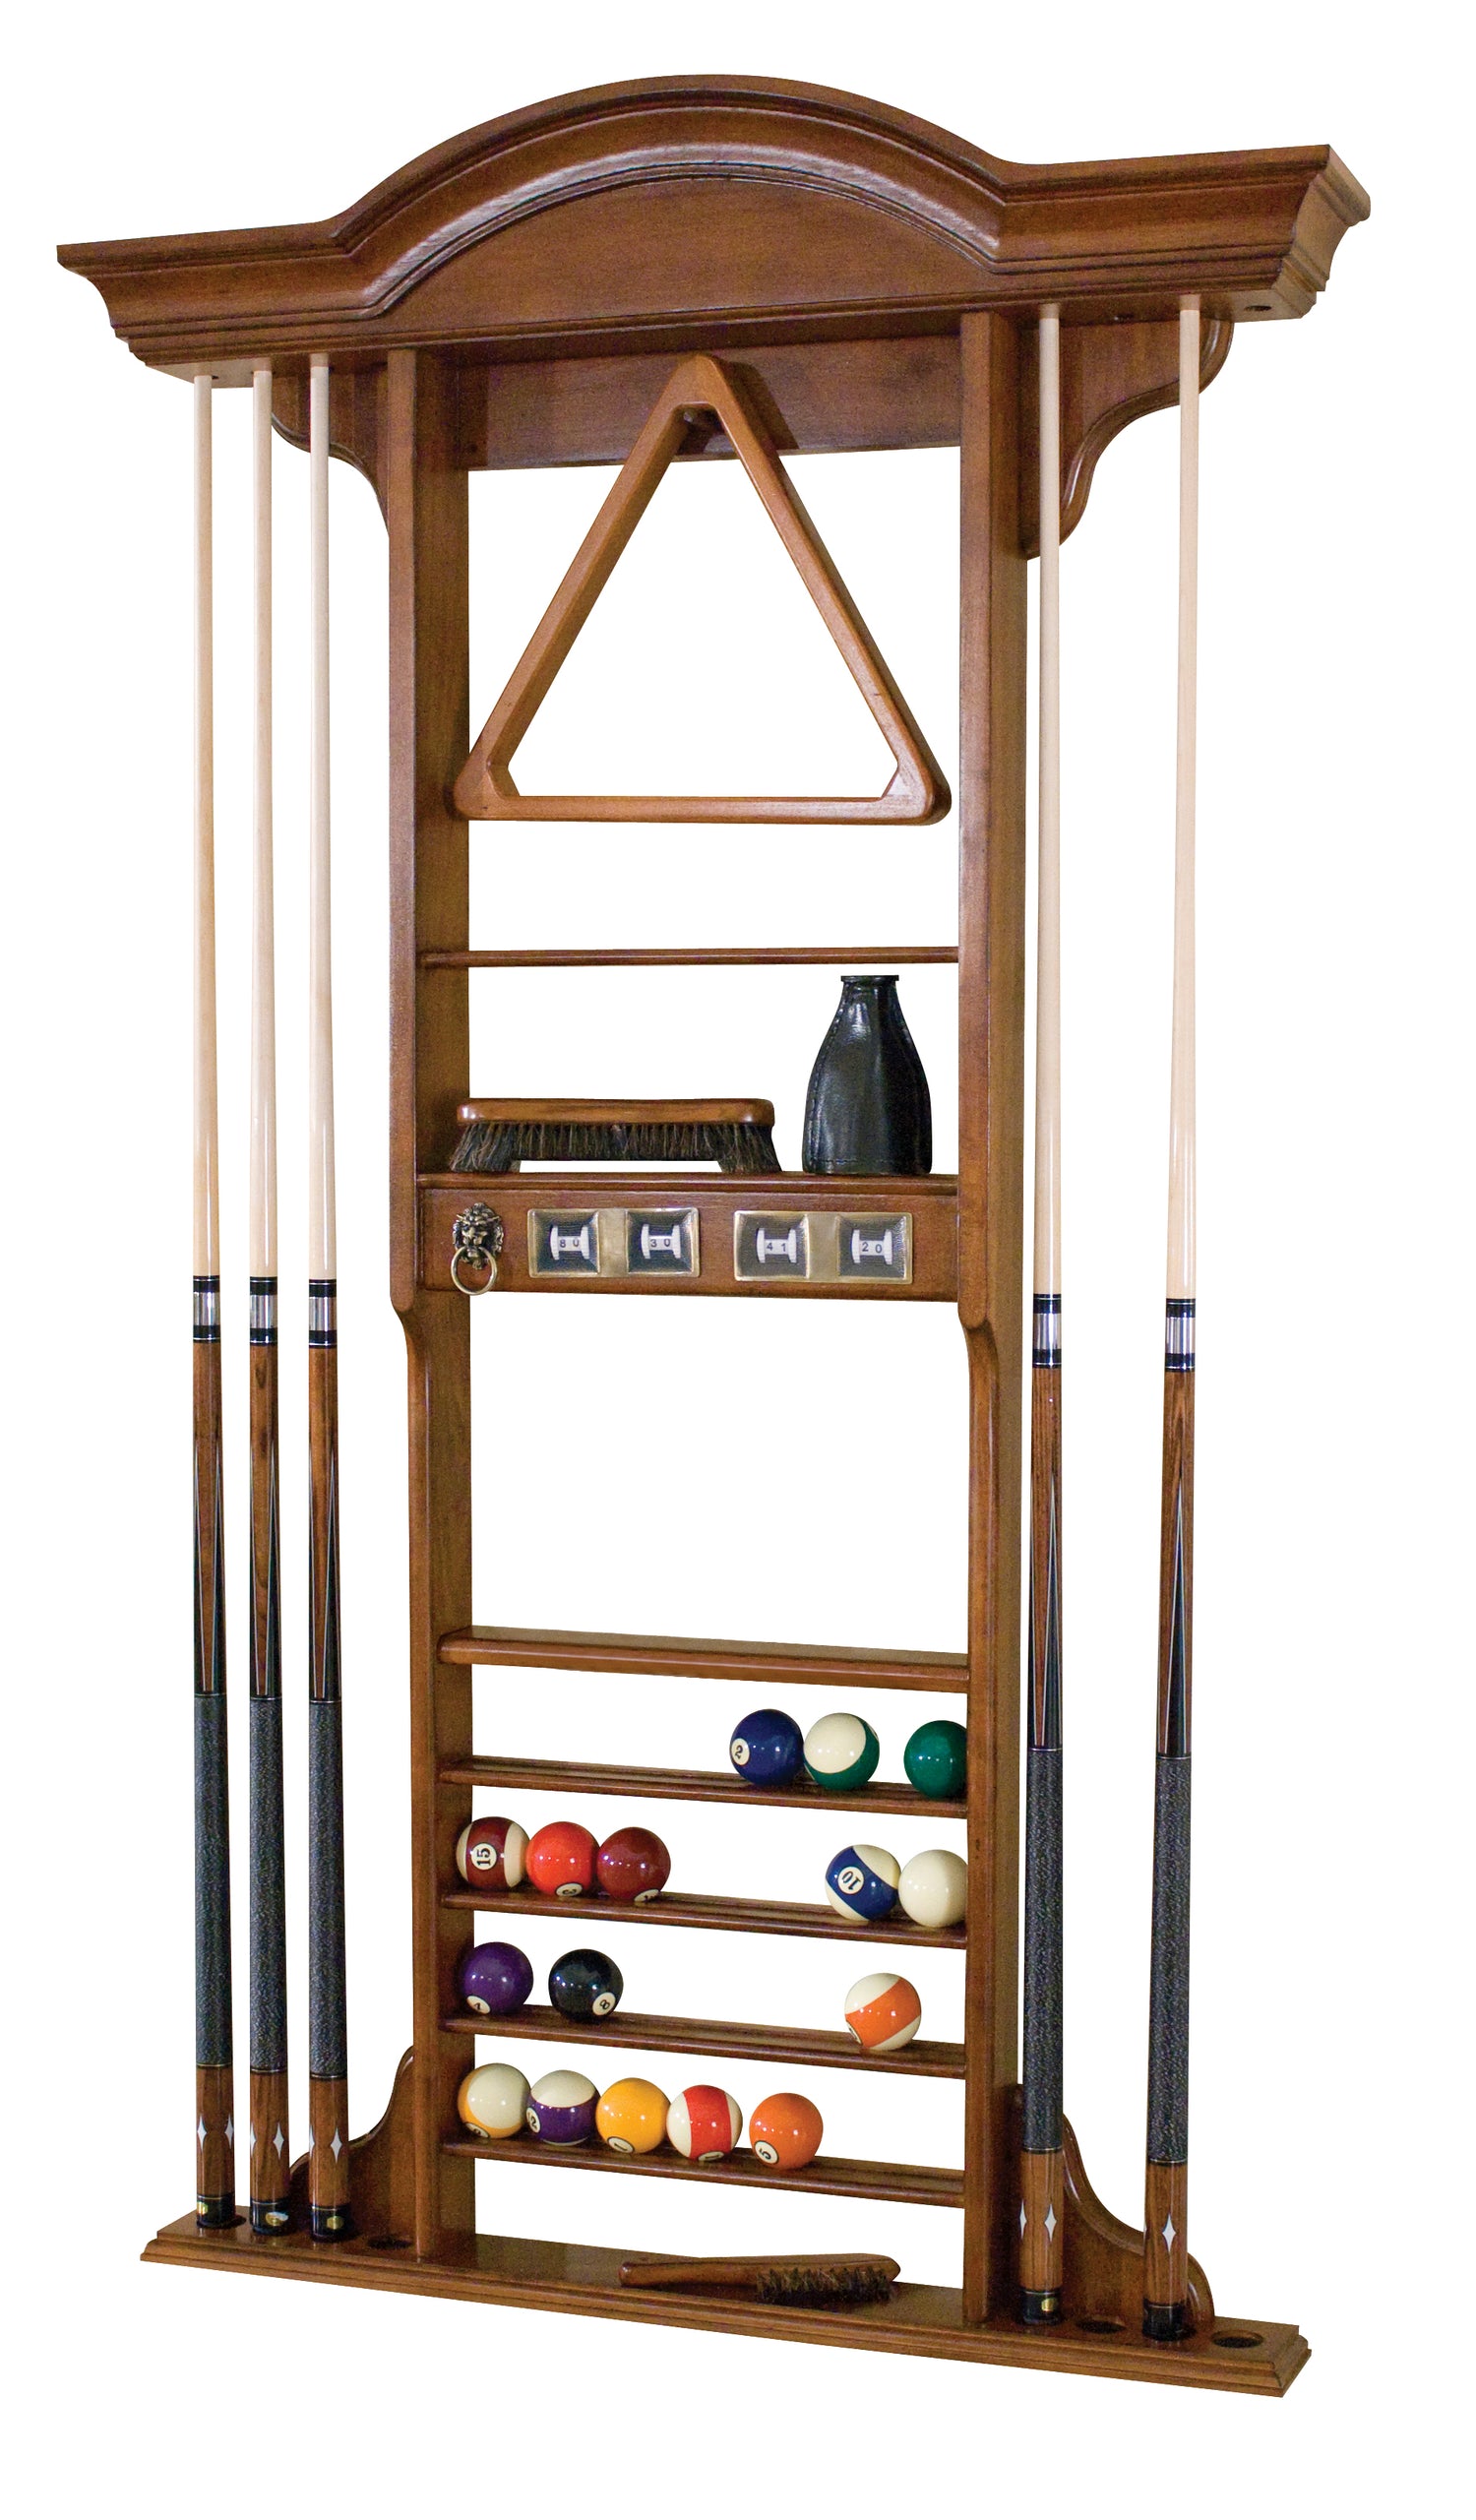 Legacy Billiards Classic Wall Cue Rack with Pool Balls and Cues